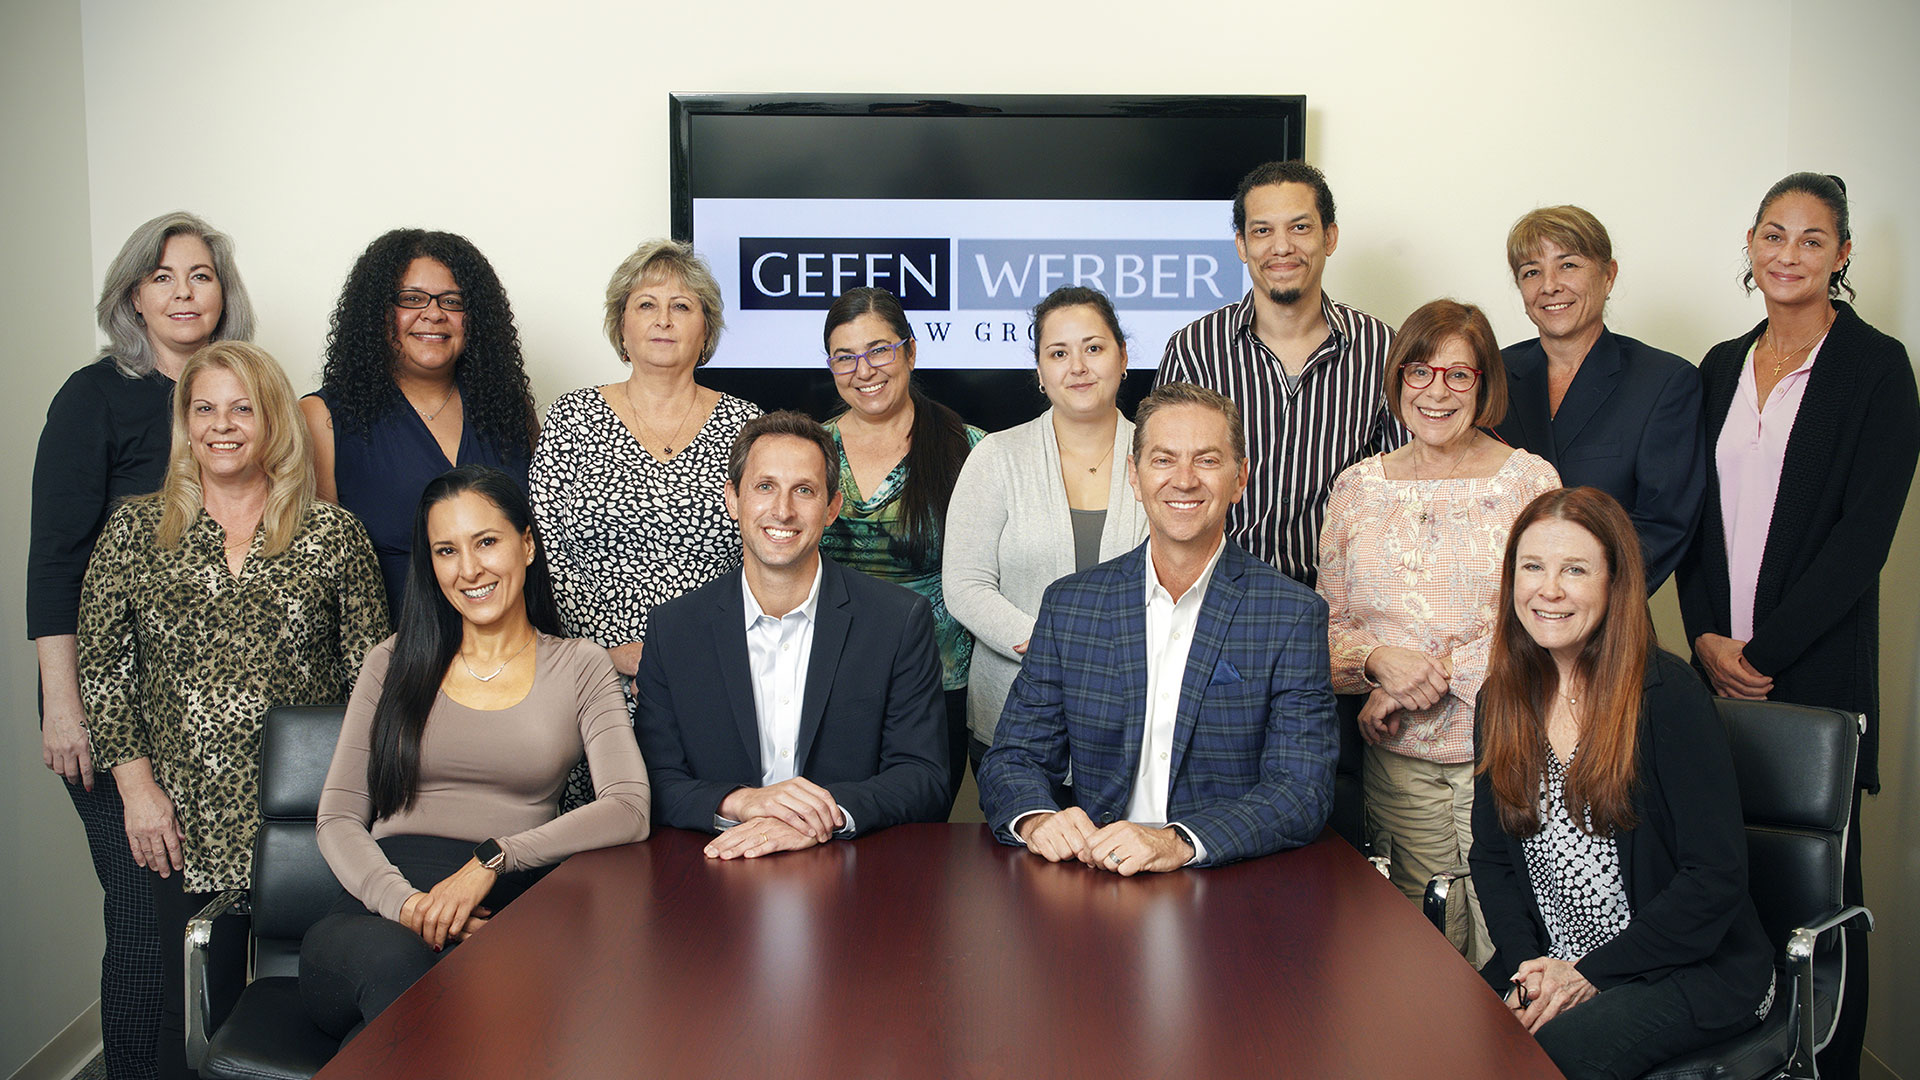 Gefen Werber Law - available throughout Florida